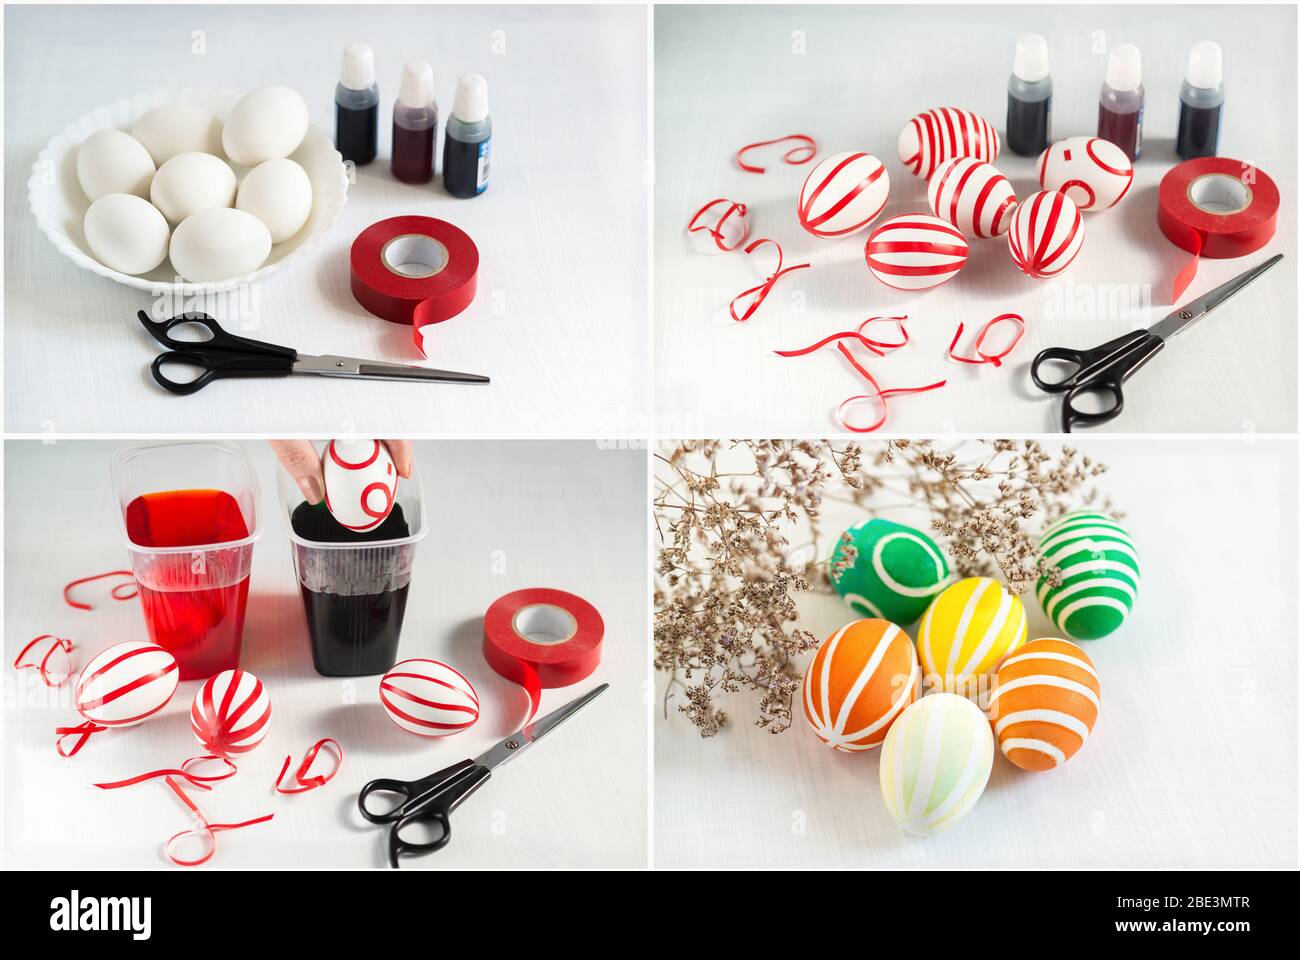 Independent coloring of Easter eggs. Instructions in pictures for coloring with scissors, adhesive tape, and food dye . Holiday worries Stock Photo